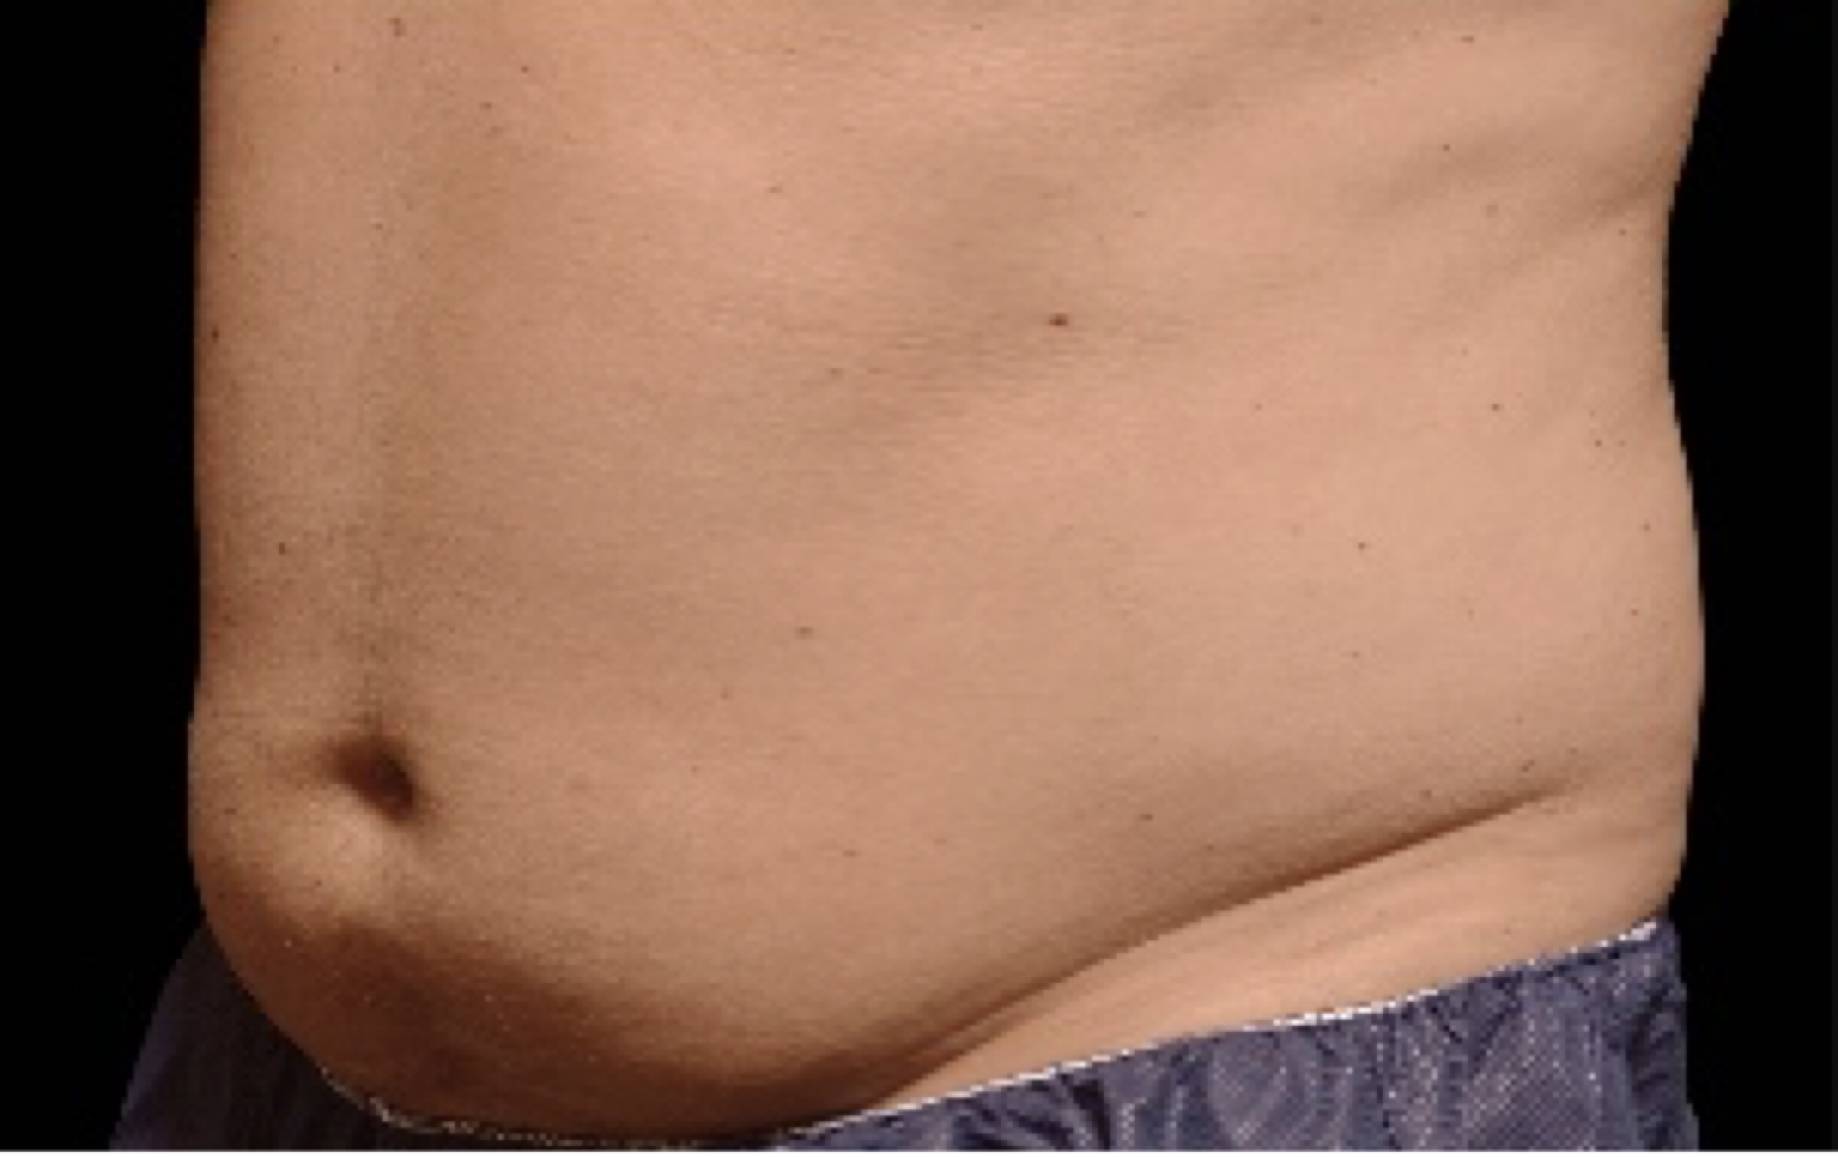 how to get rid of love handles